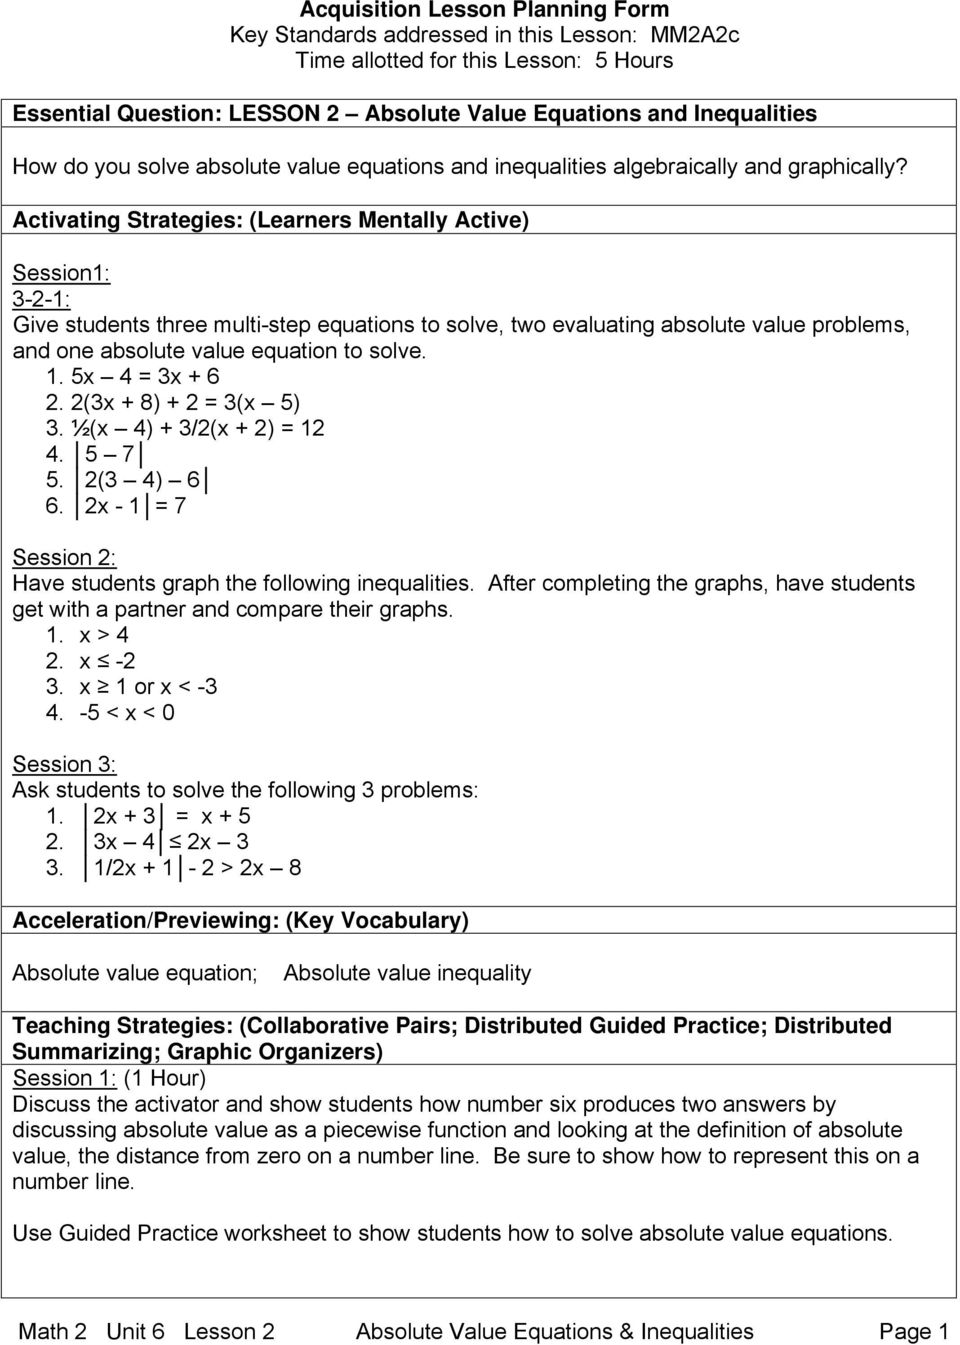 Activating Strategies: (Learners Mentally Active) Session1: 3-2-1: Give students three multi-step equations to solve, two evaluating absolute value problems, and one absolute value equation to solve.